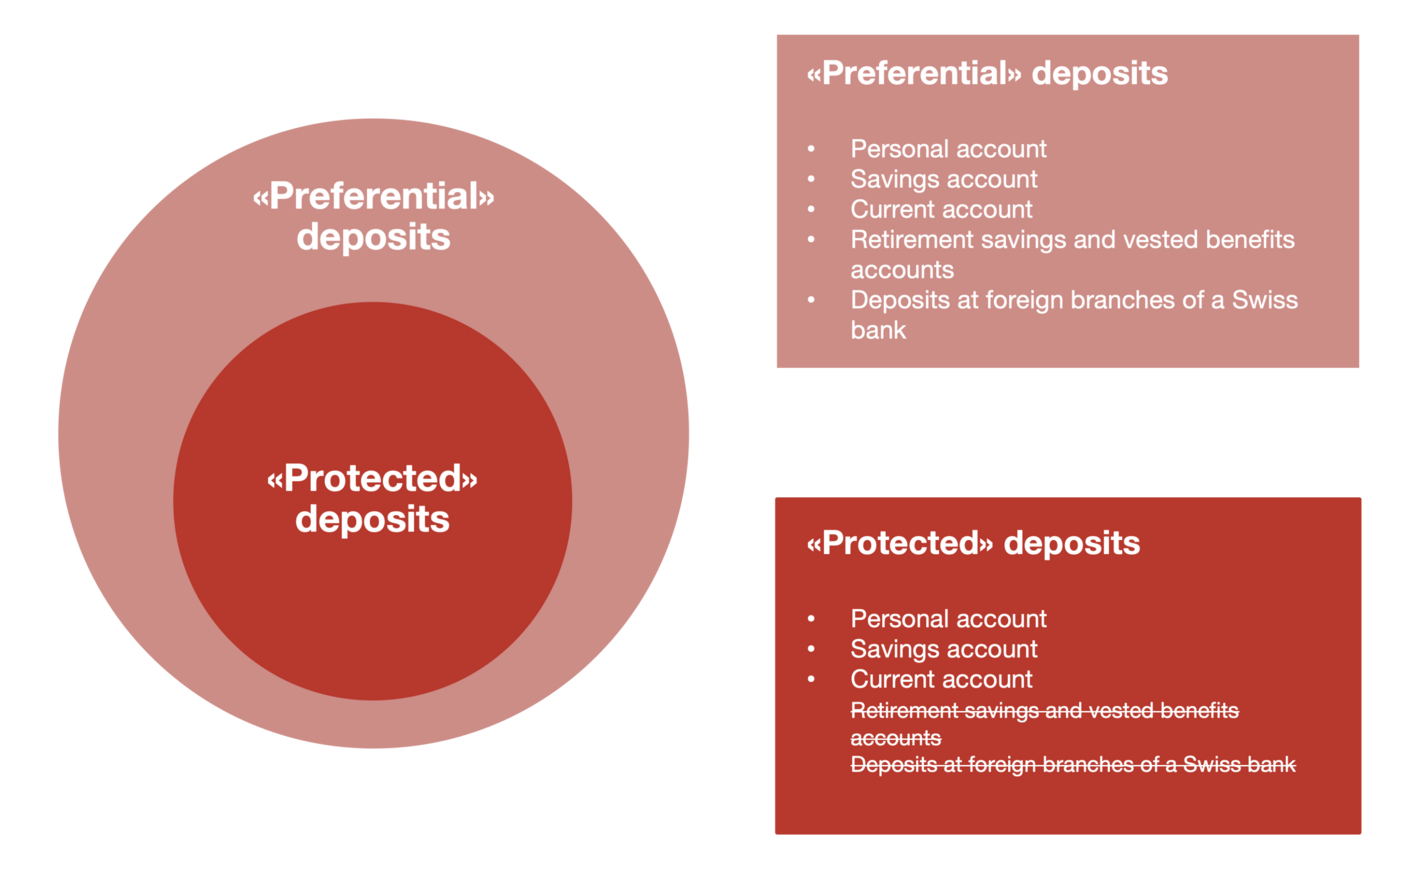 What is the difference between «preferential» deposits and «protected» deposits?